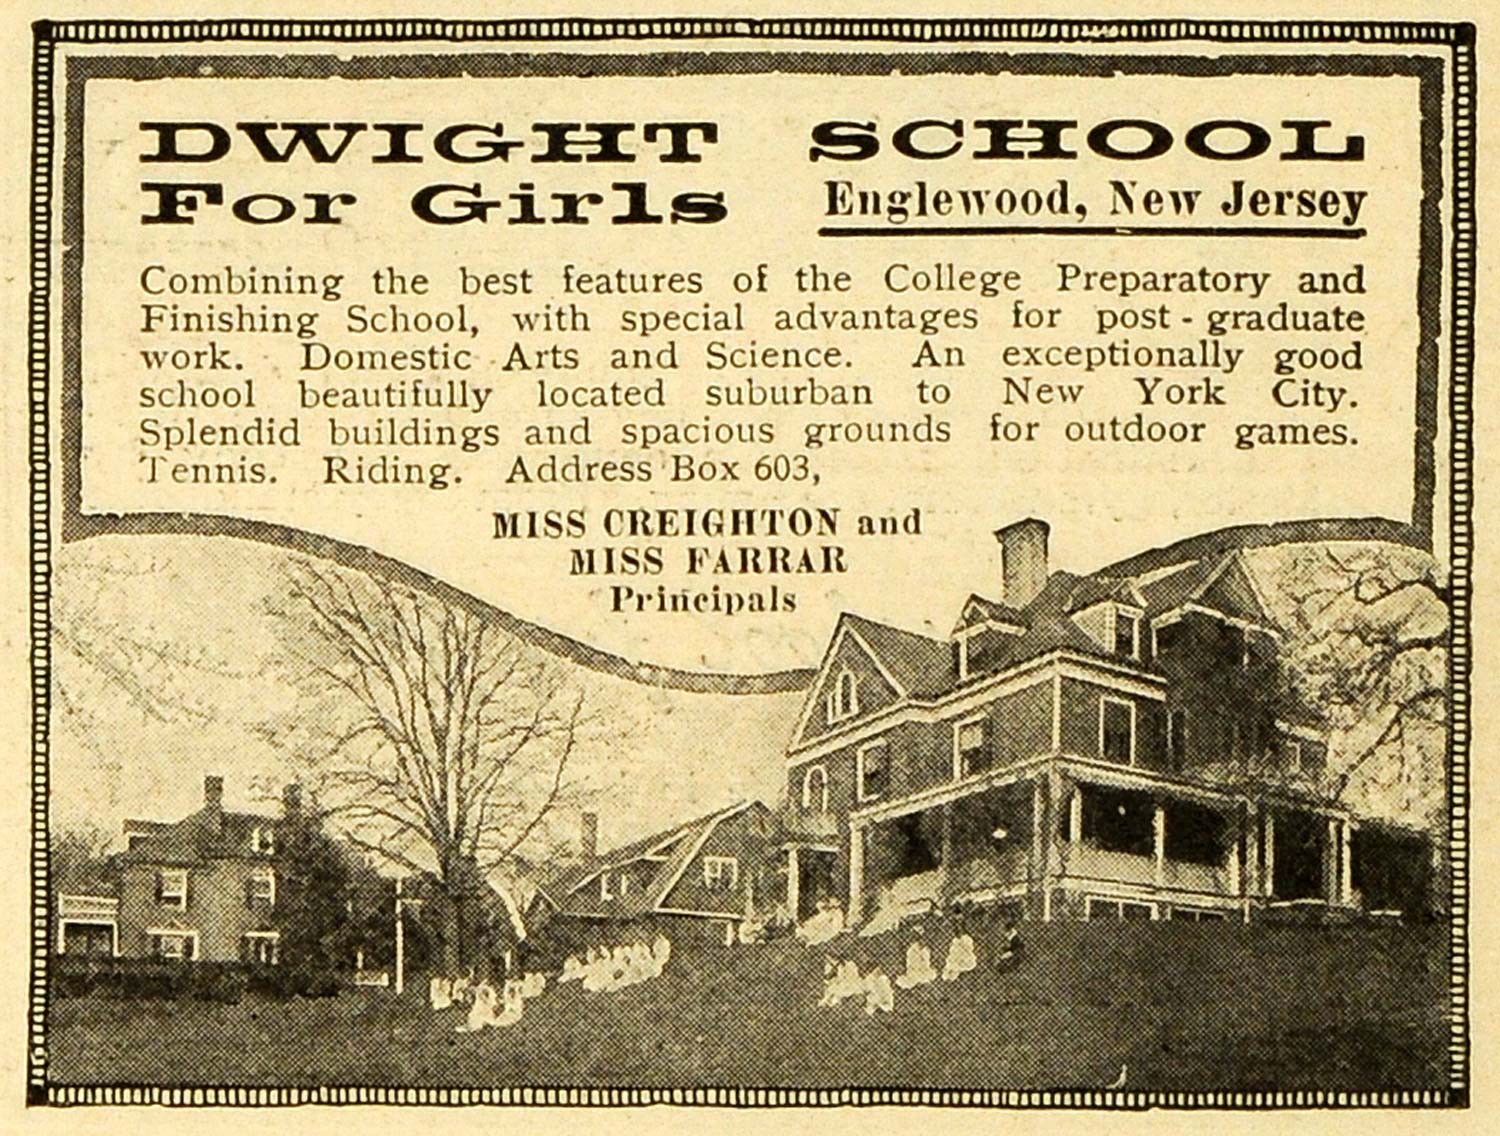 1920 Ad Dwight School for Girls College Preparatory Institution Englewood HRM1